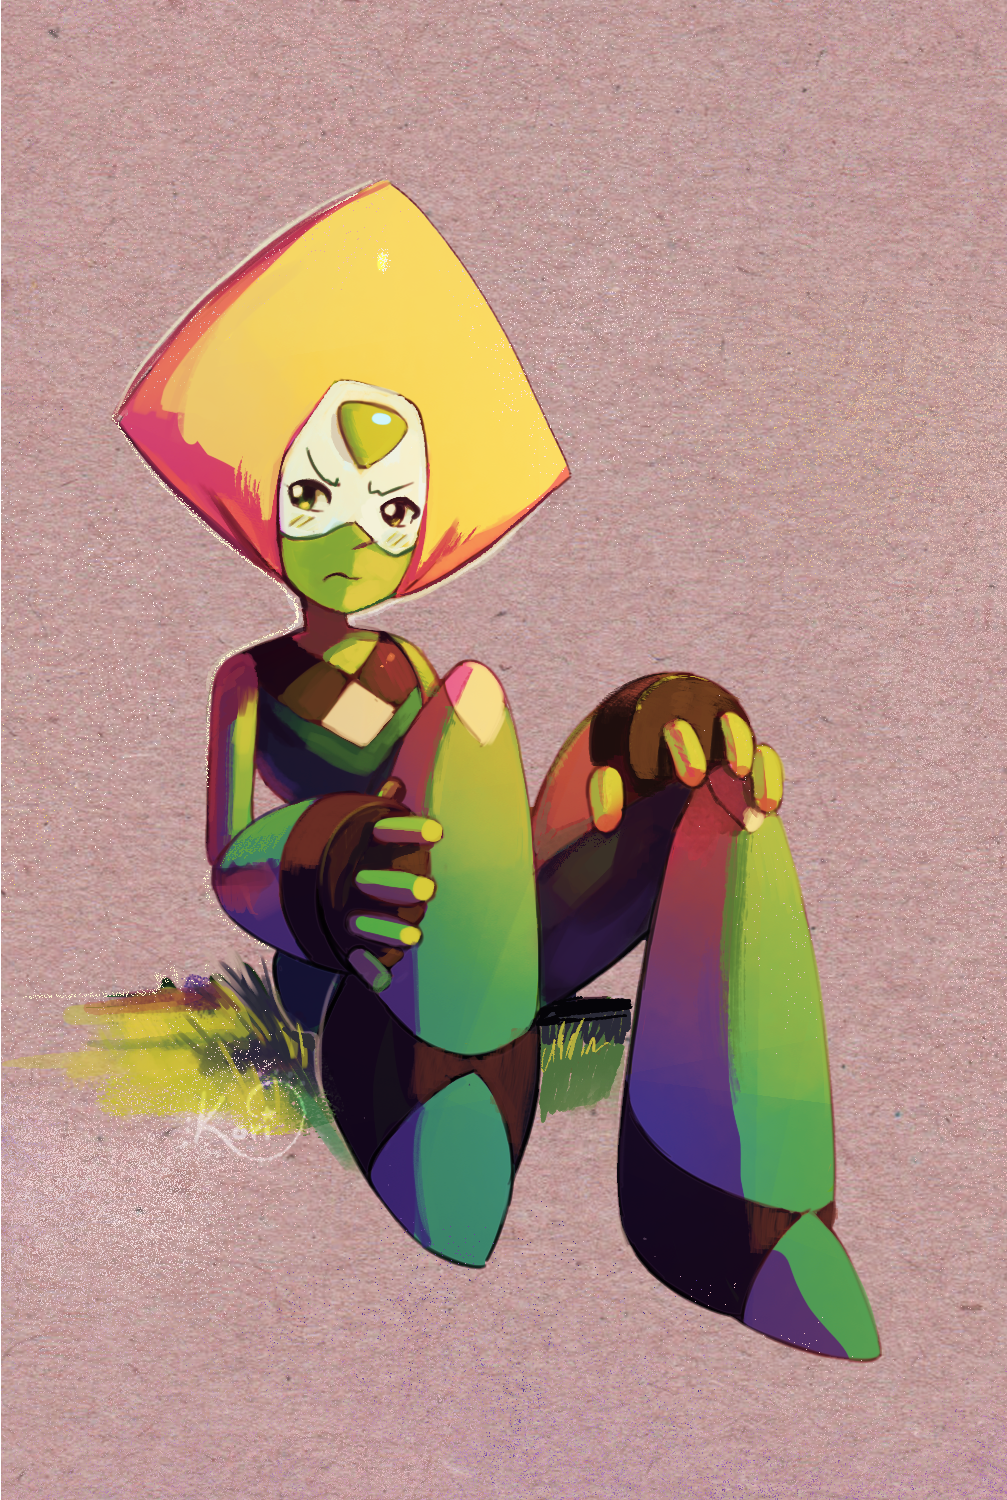 Some Peri Art for your dash